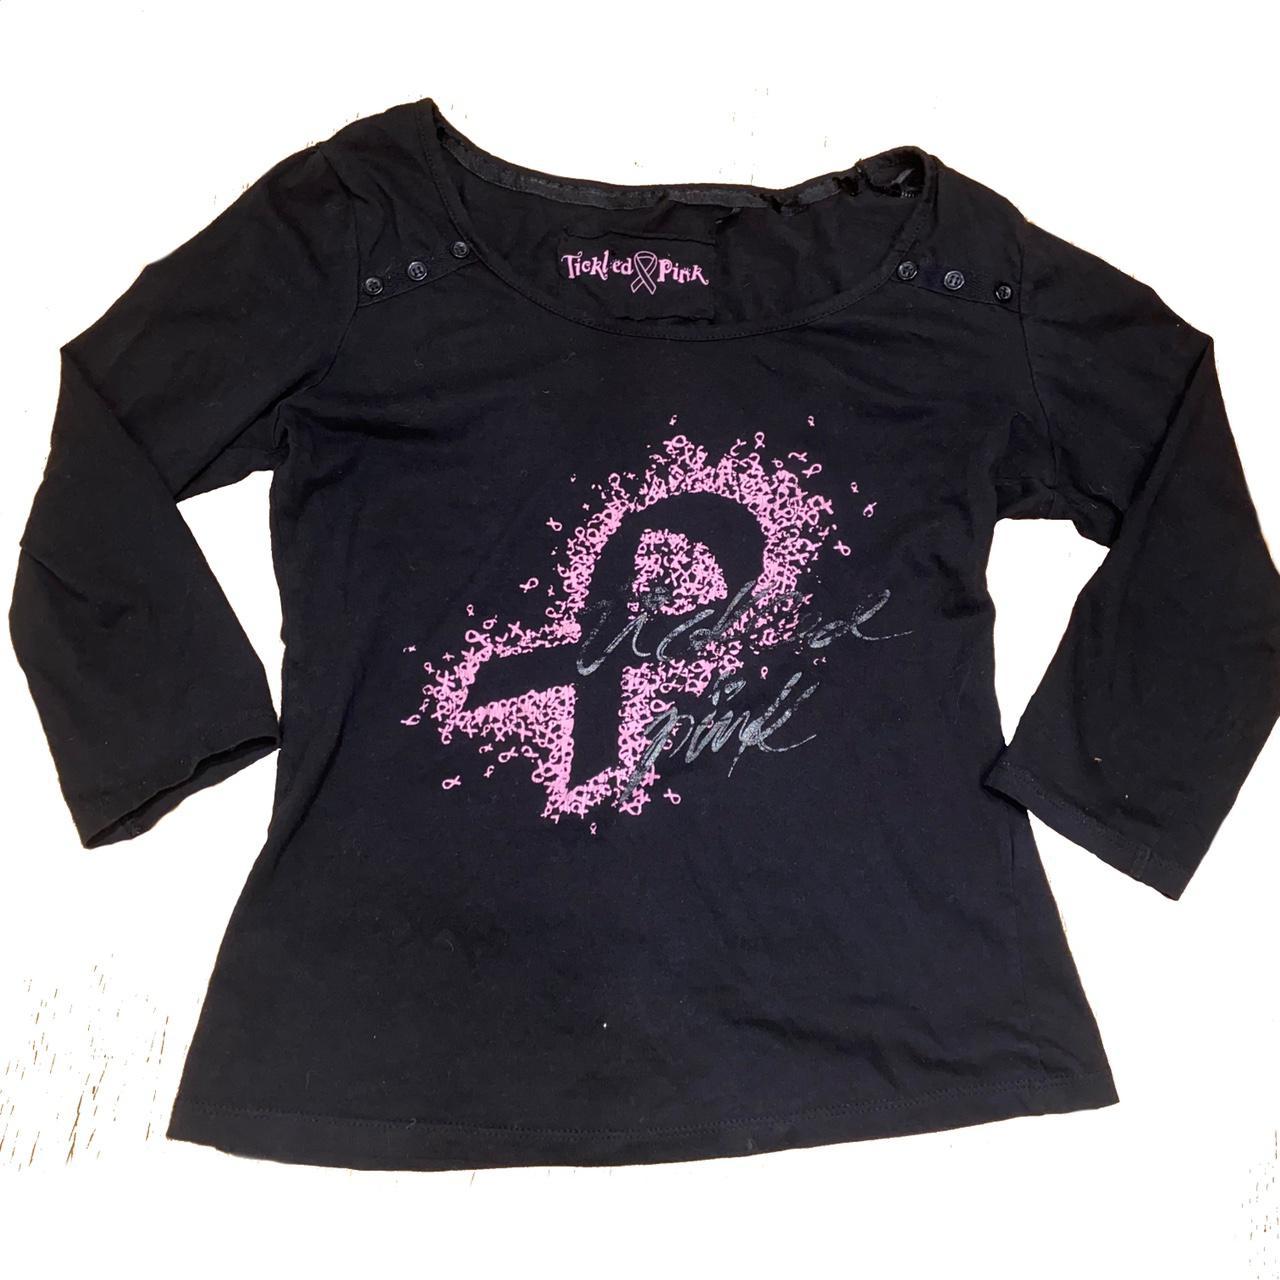 Women's Black and Pink